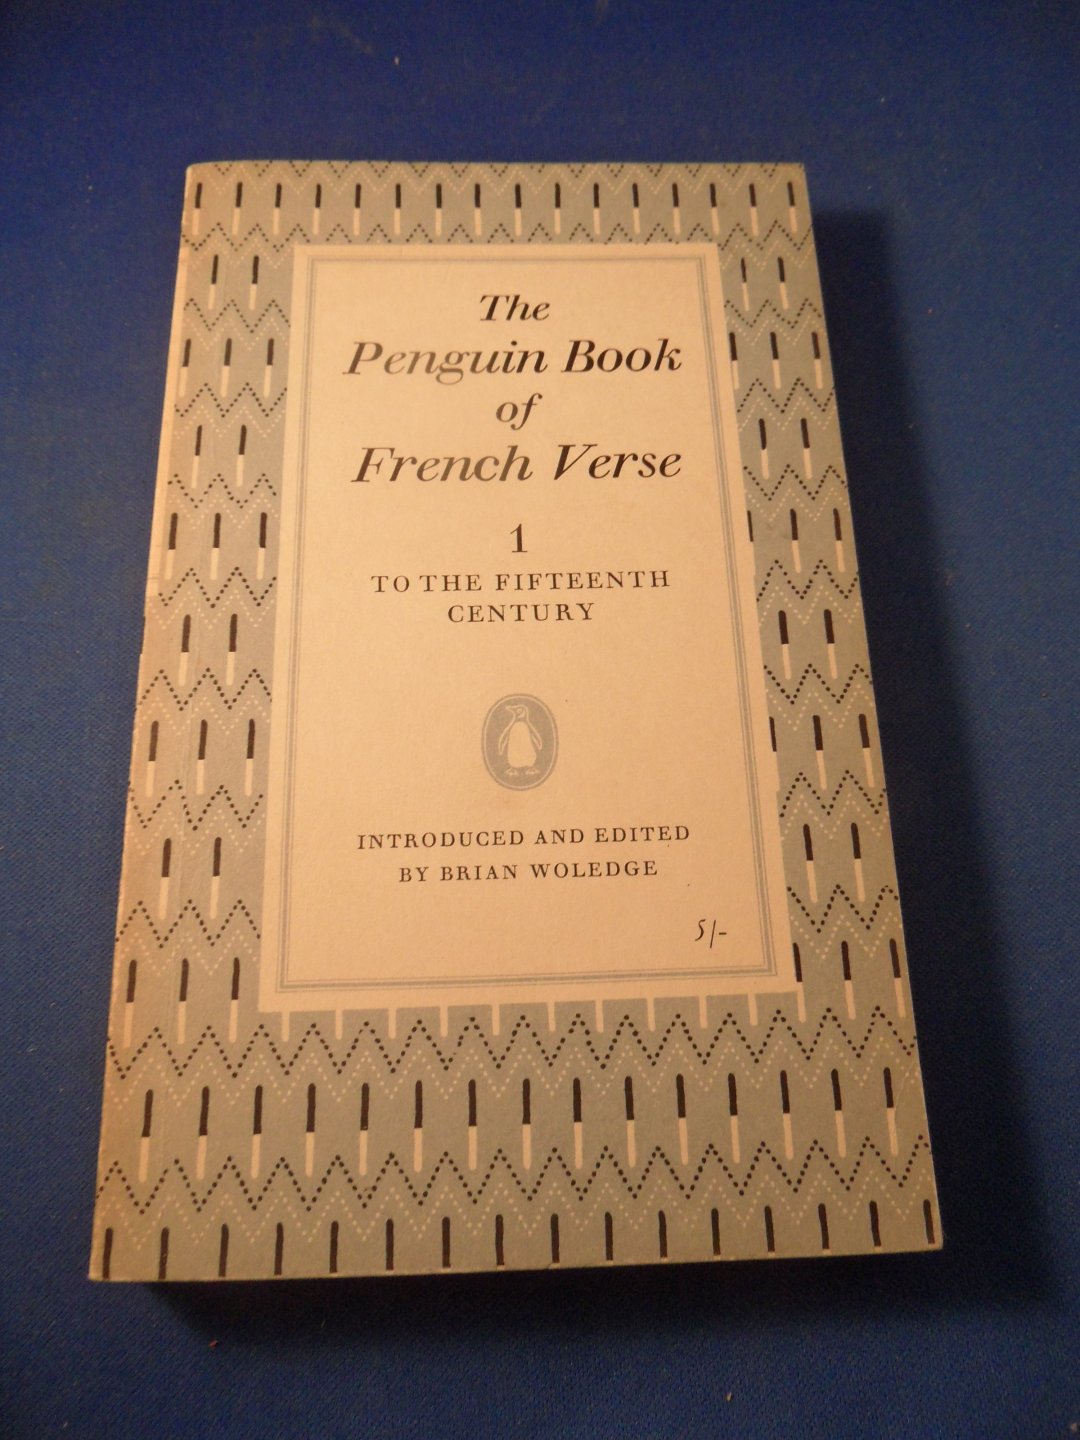 Woledge, Brian - The Penguin Book of French Verse 1. To the fiftheenth century